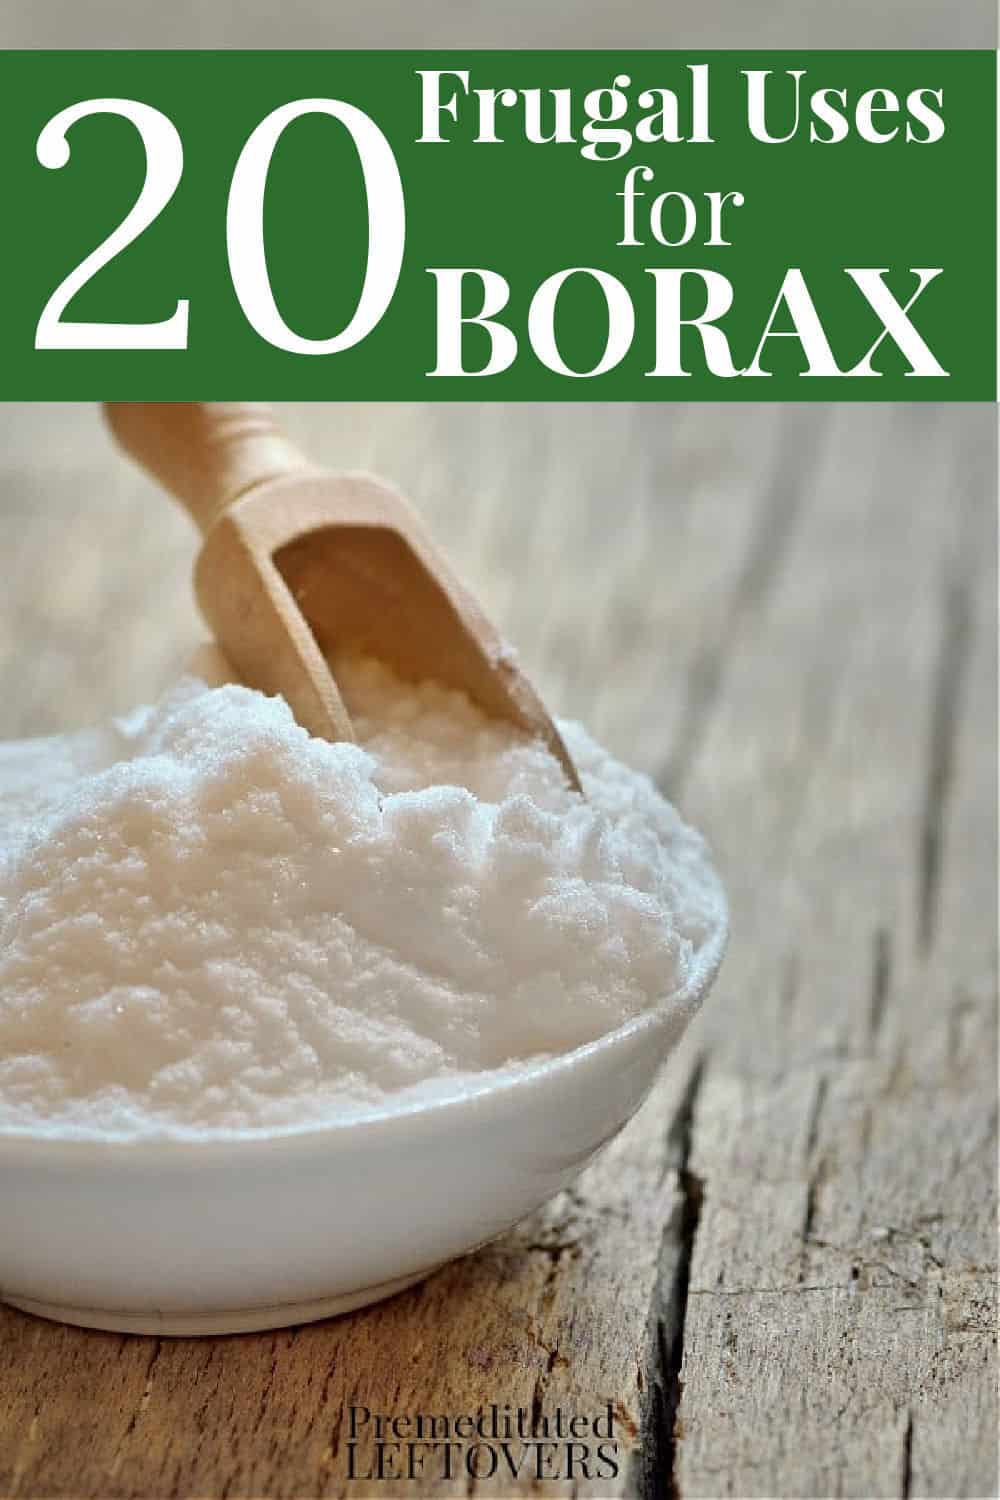 frugal uses for borax